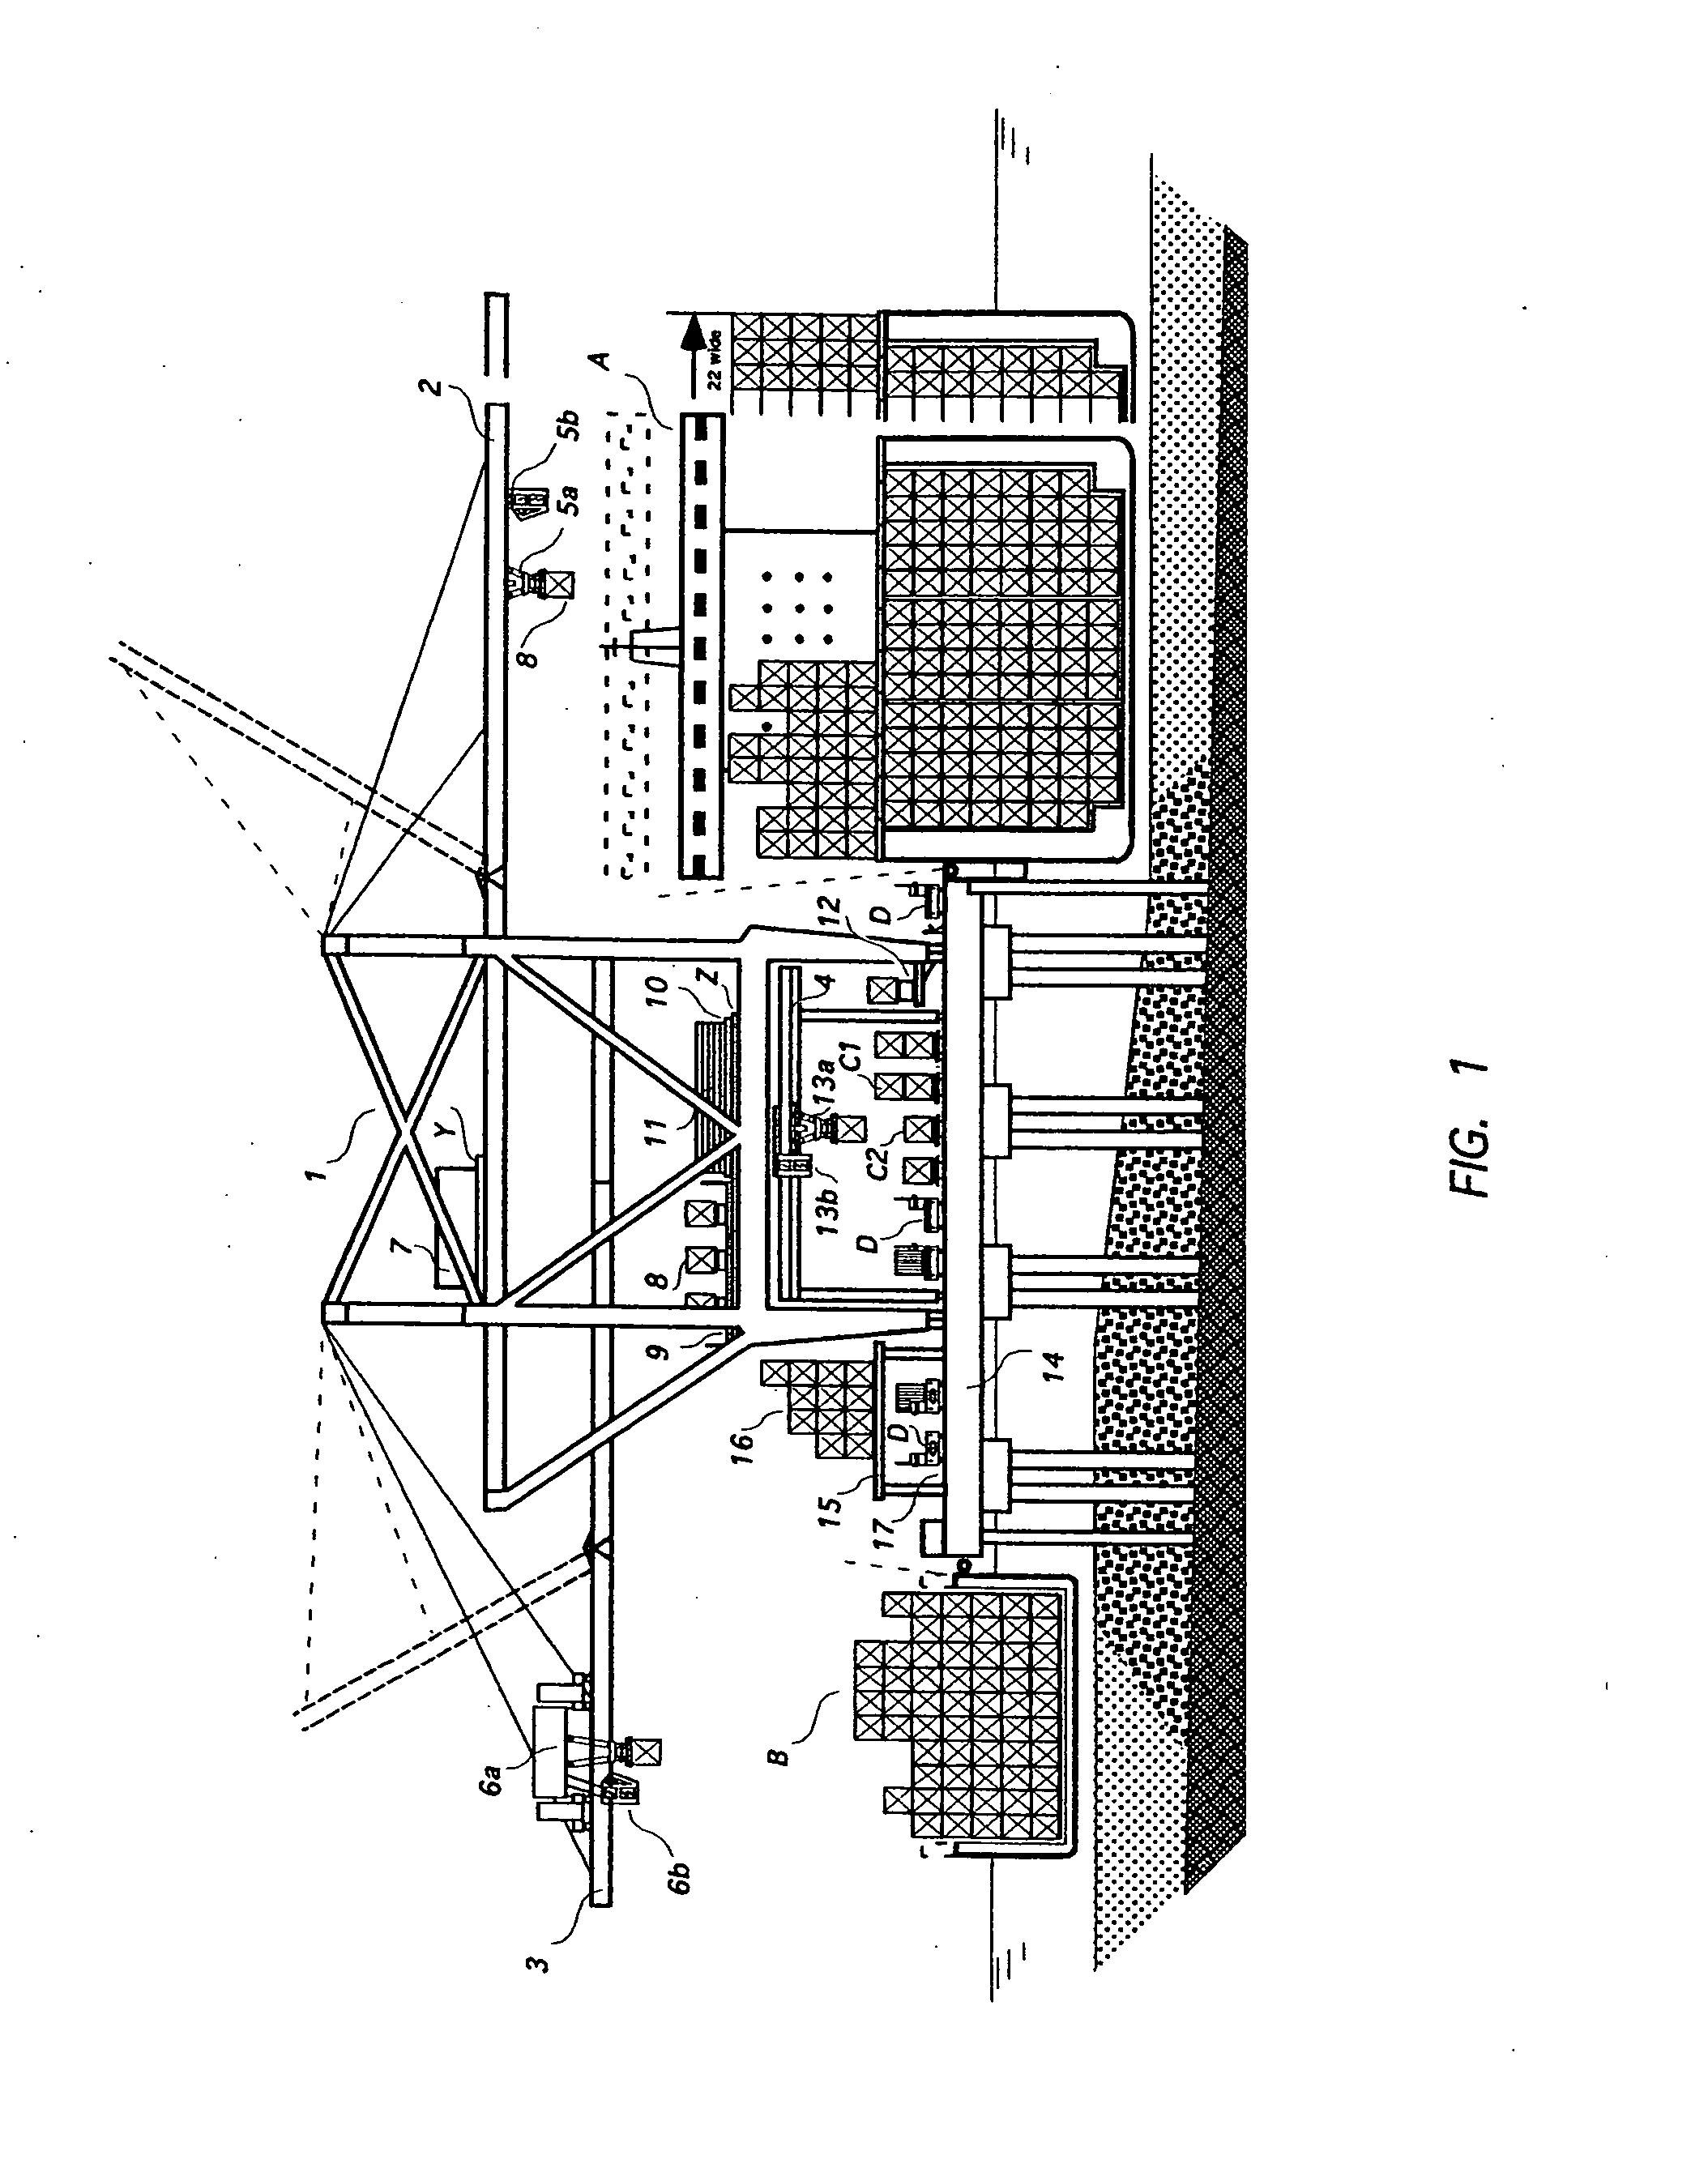 Container crane apparatus and method for container security screening during direct transshipment between transportation modes